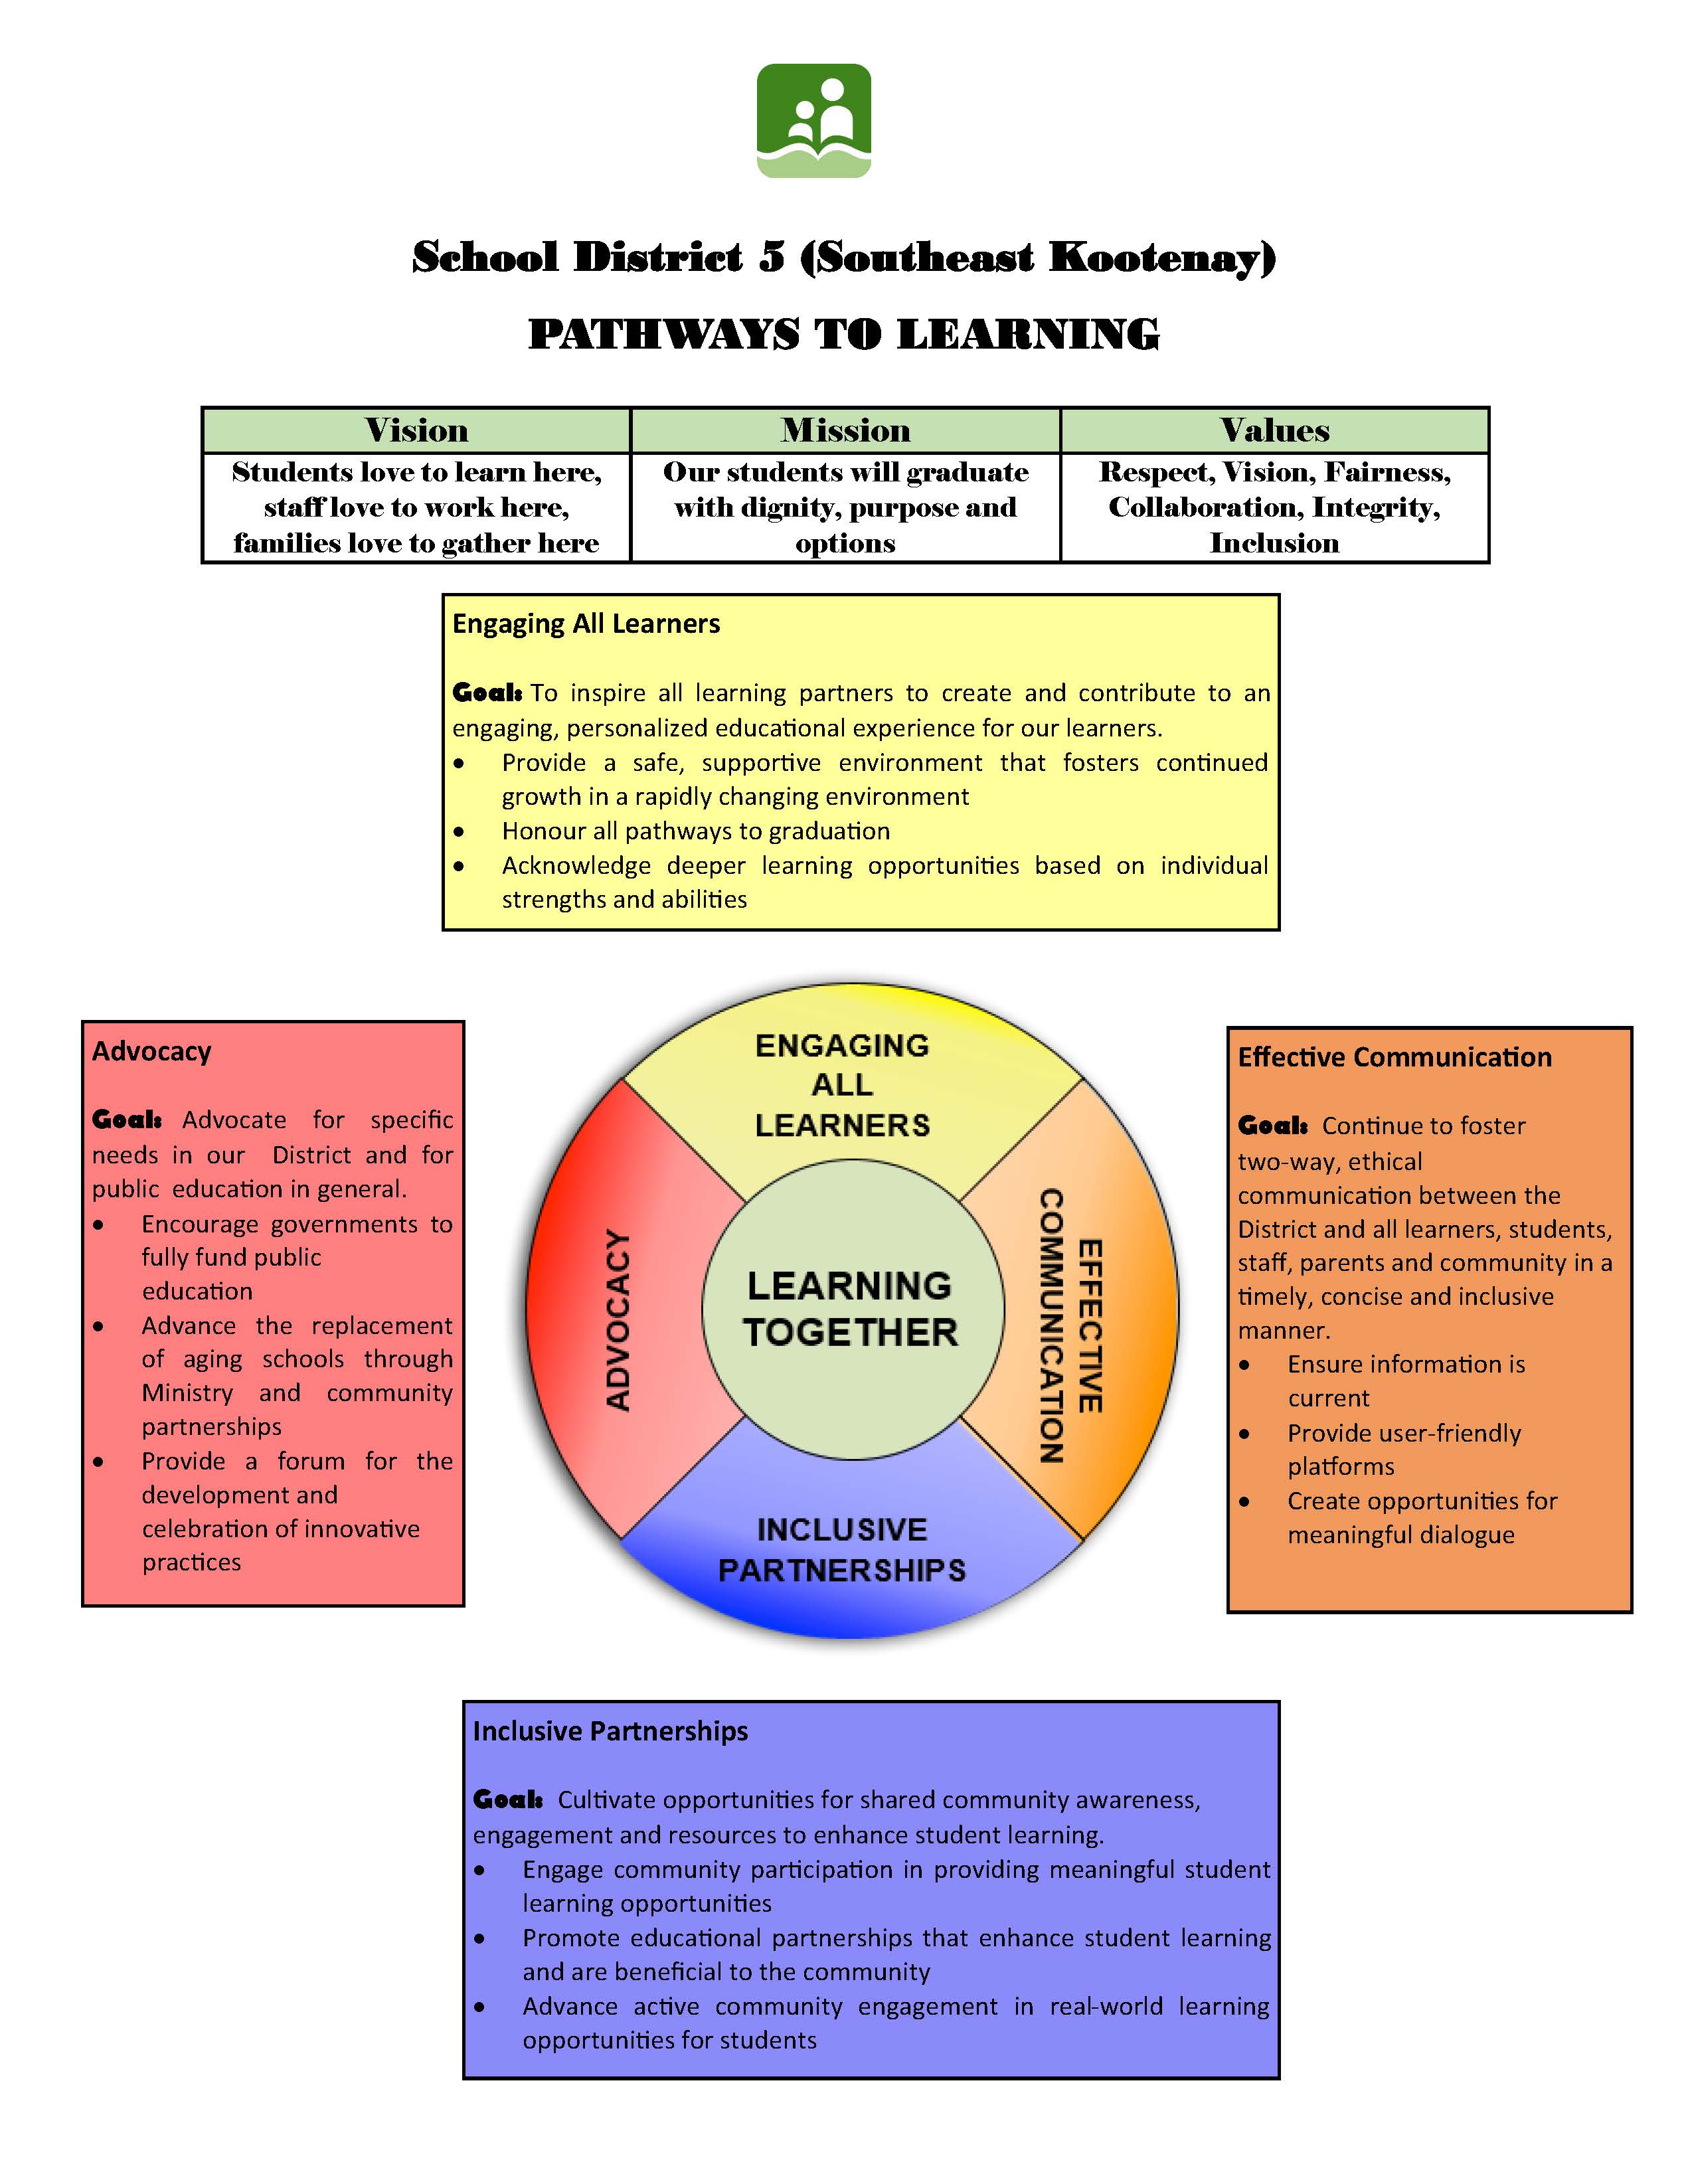 Pathways to Learning final 2015.jpg